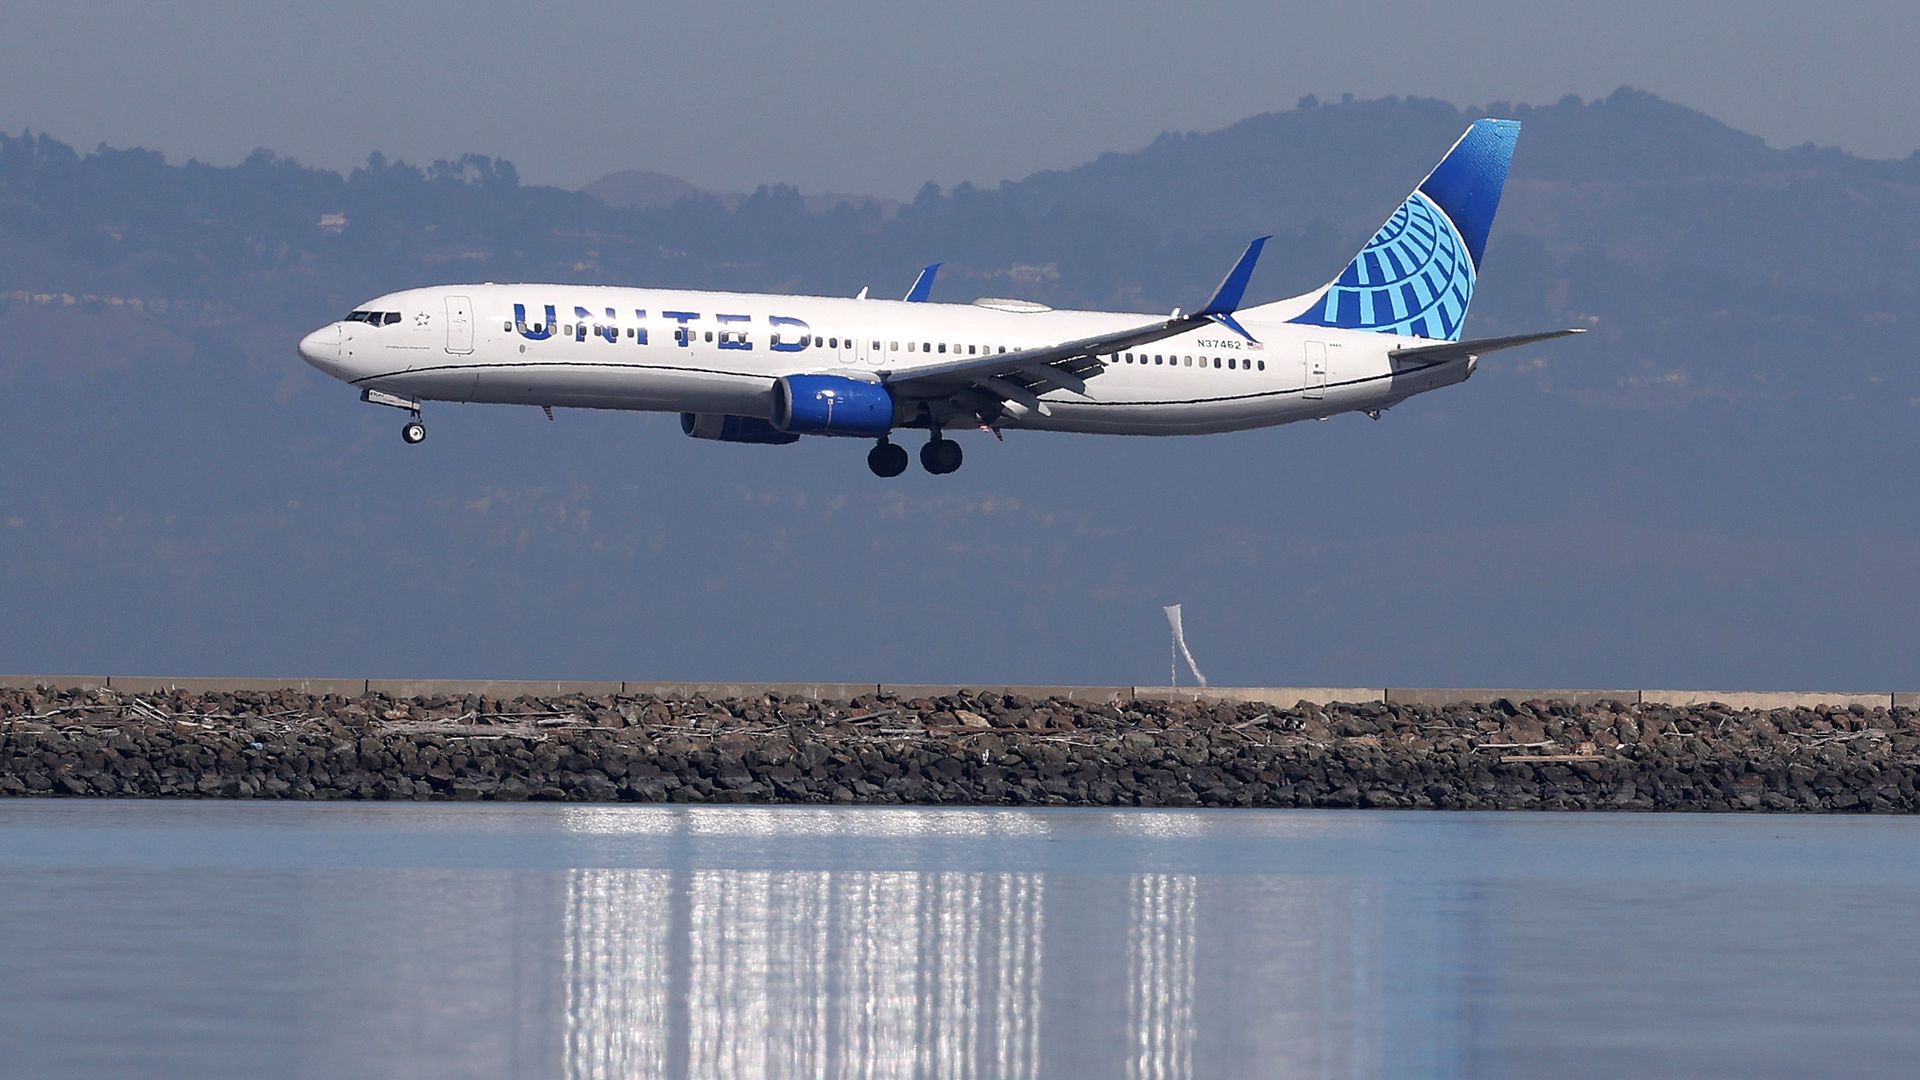 A United Airlines plane lands at San Francisco International Airport.